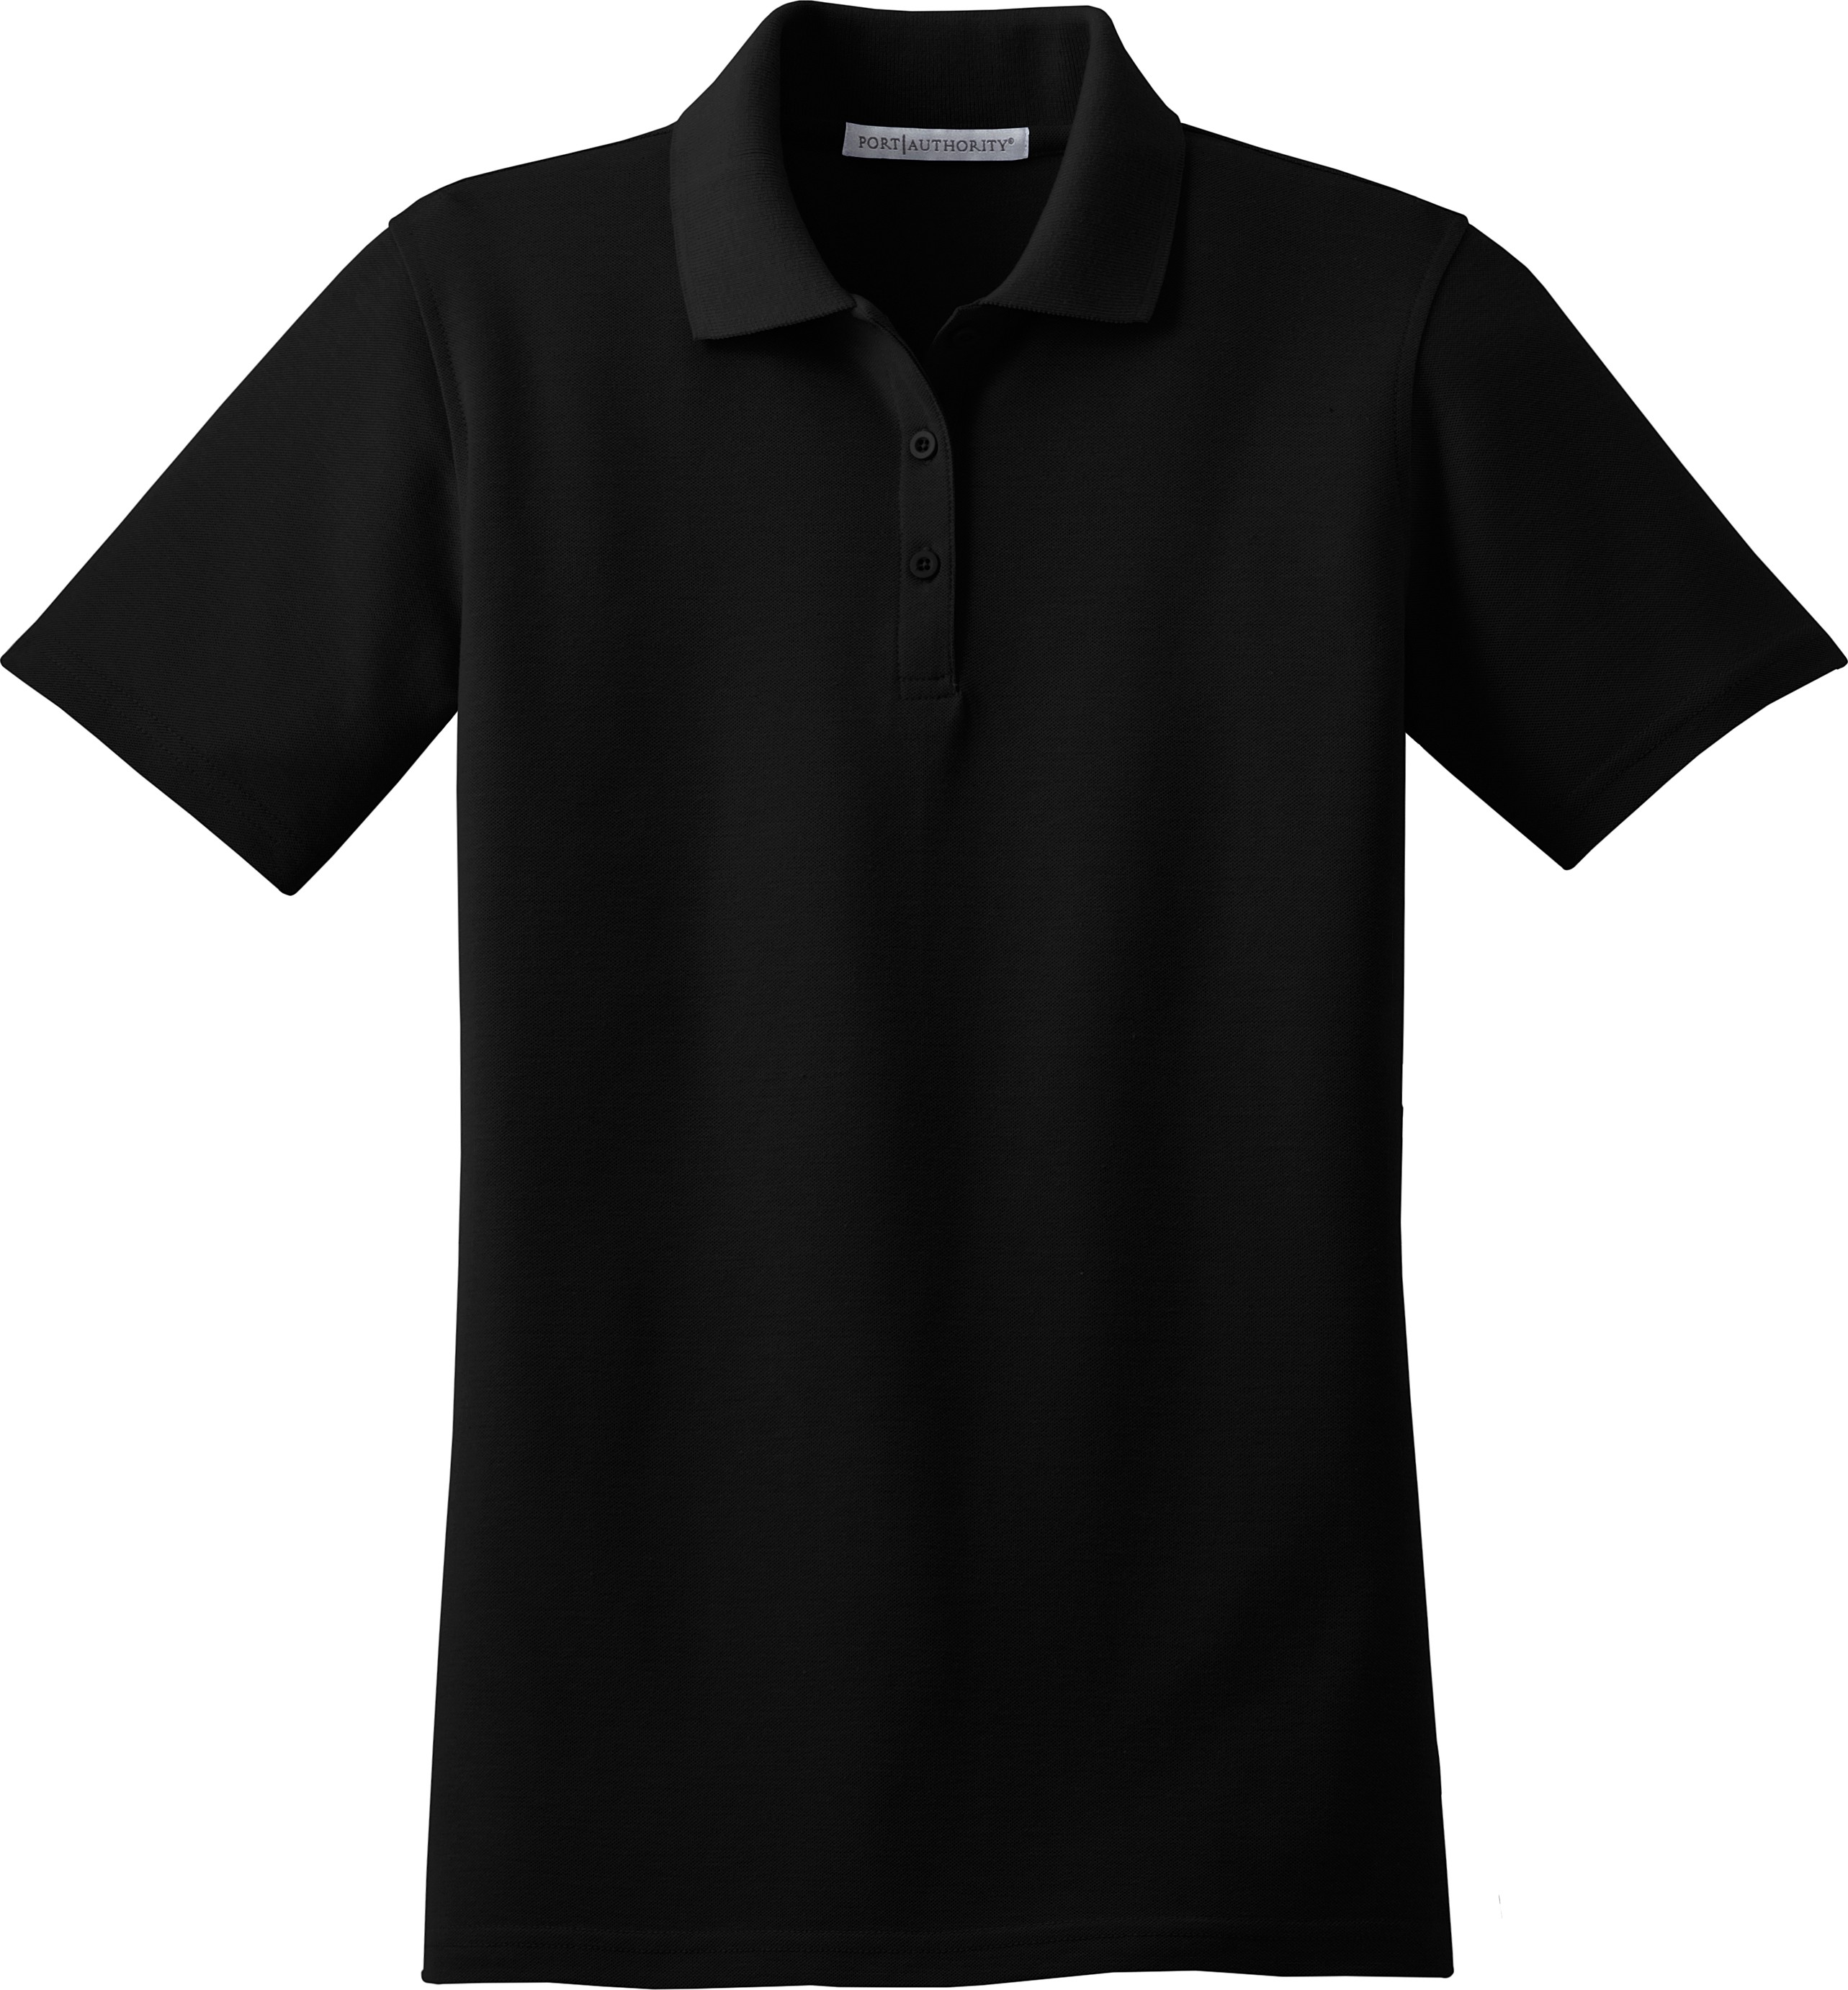 Black Polo Shirt Template Images & Pictures - Becuo